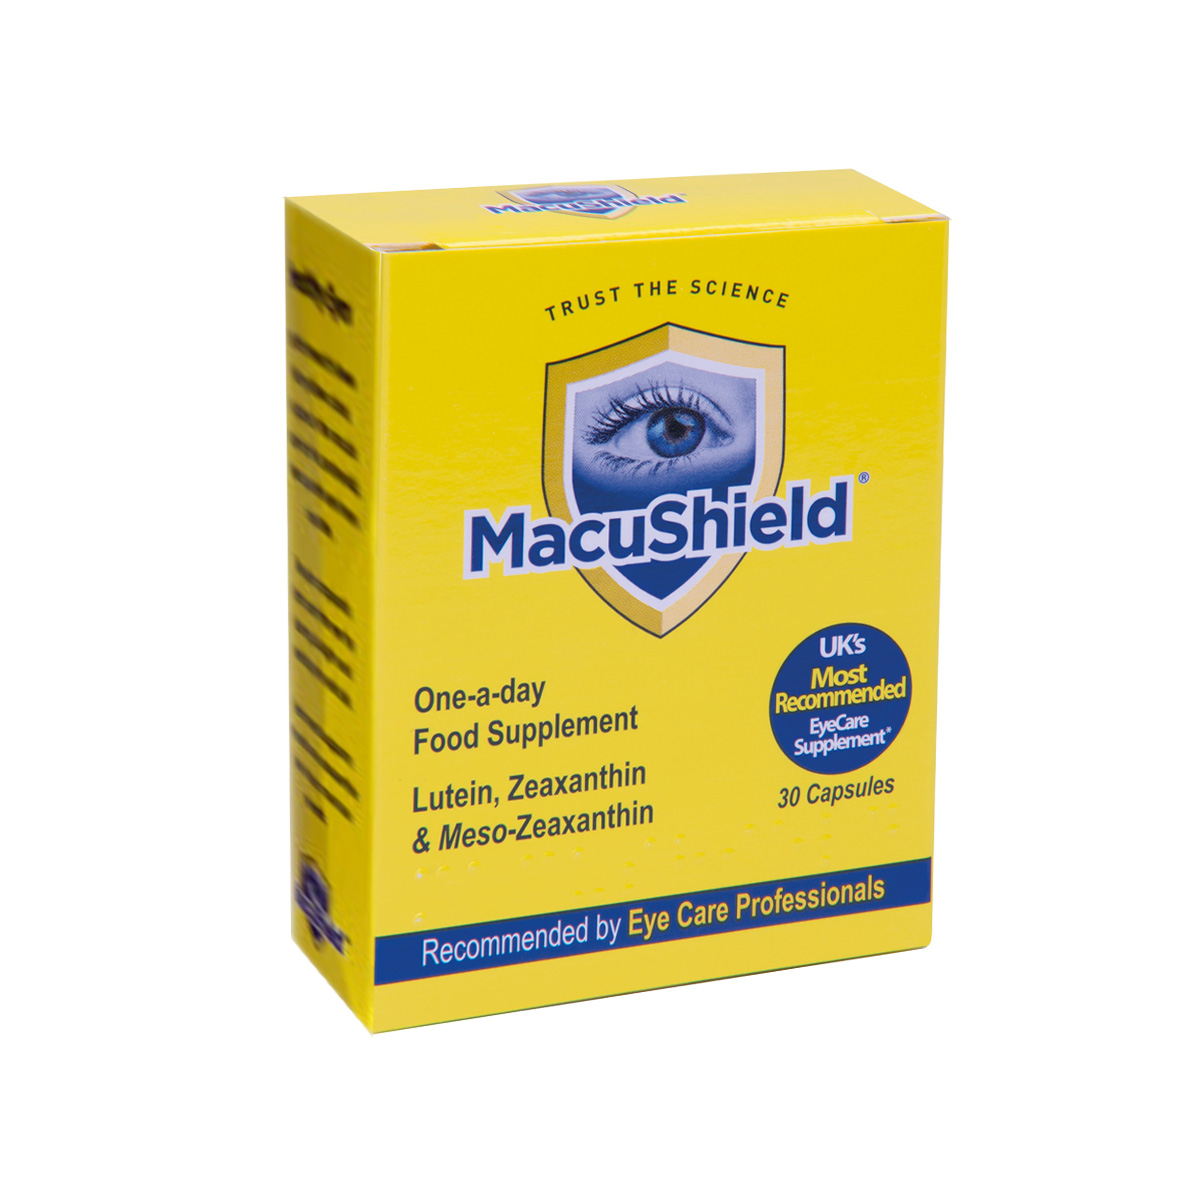 Macushield tablets